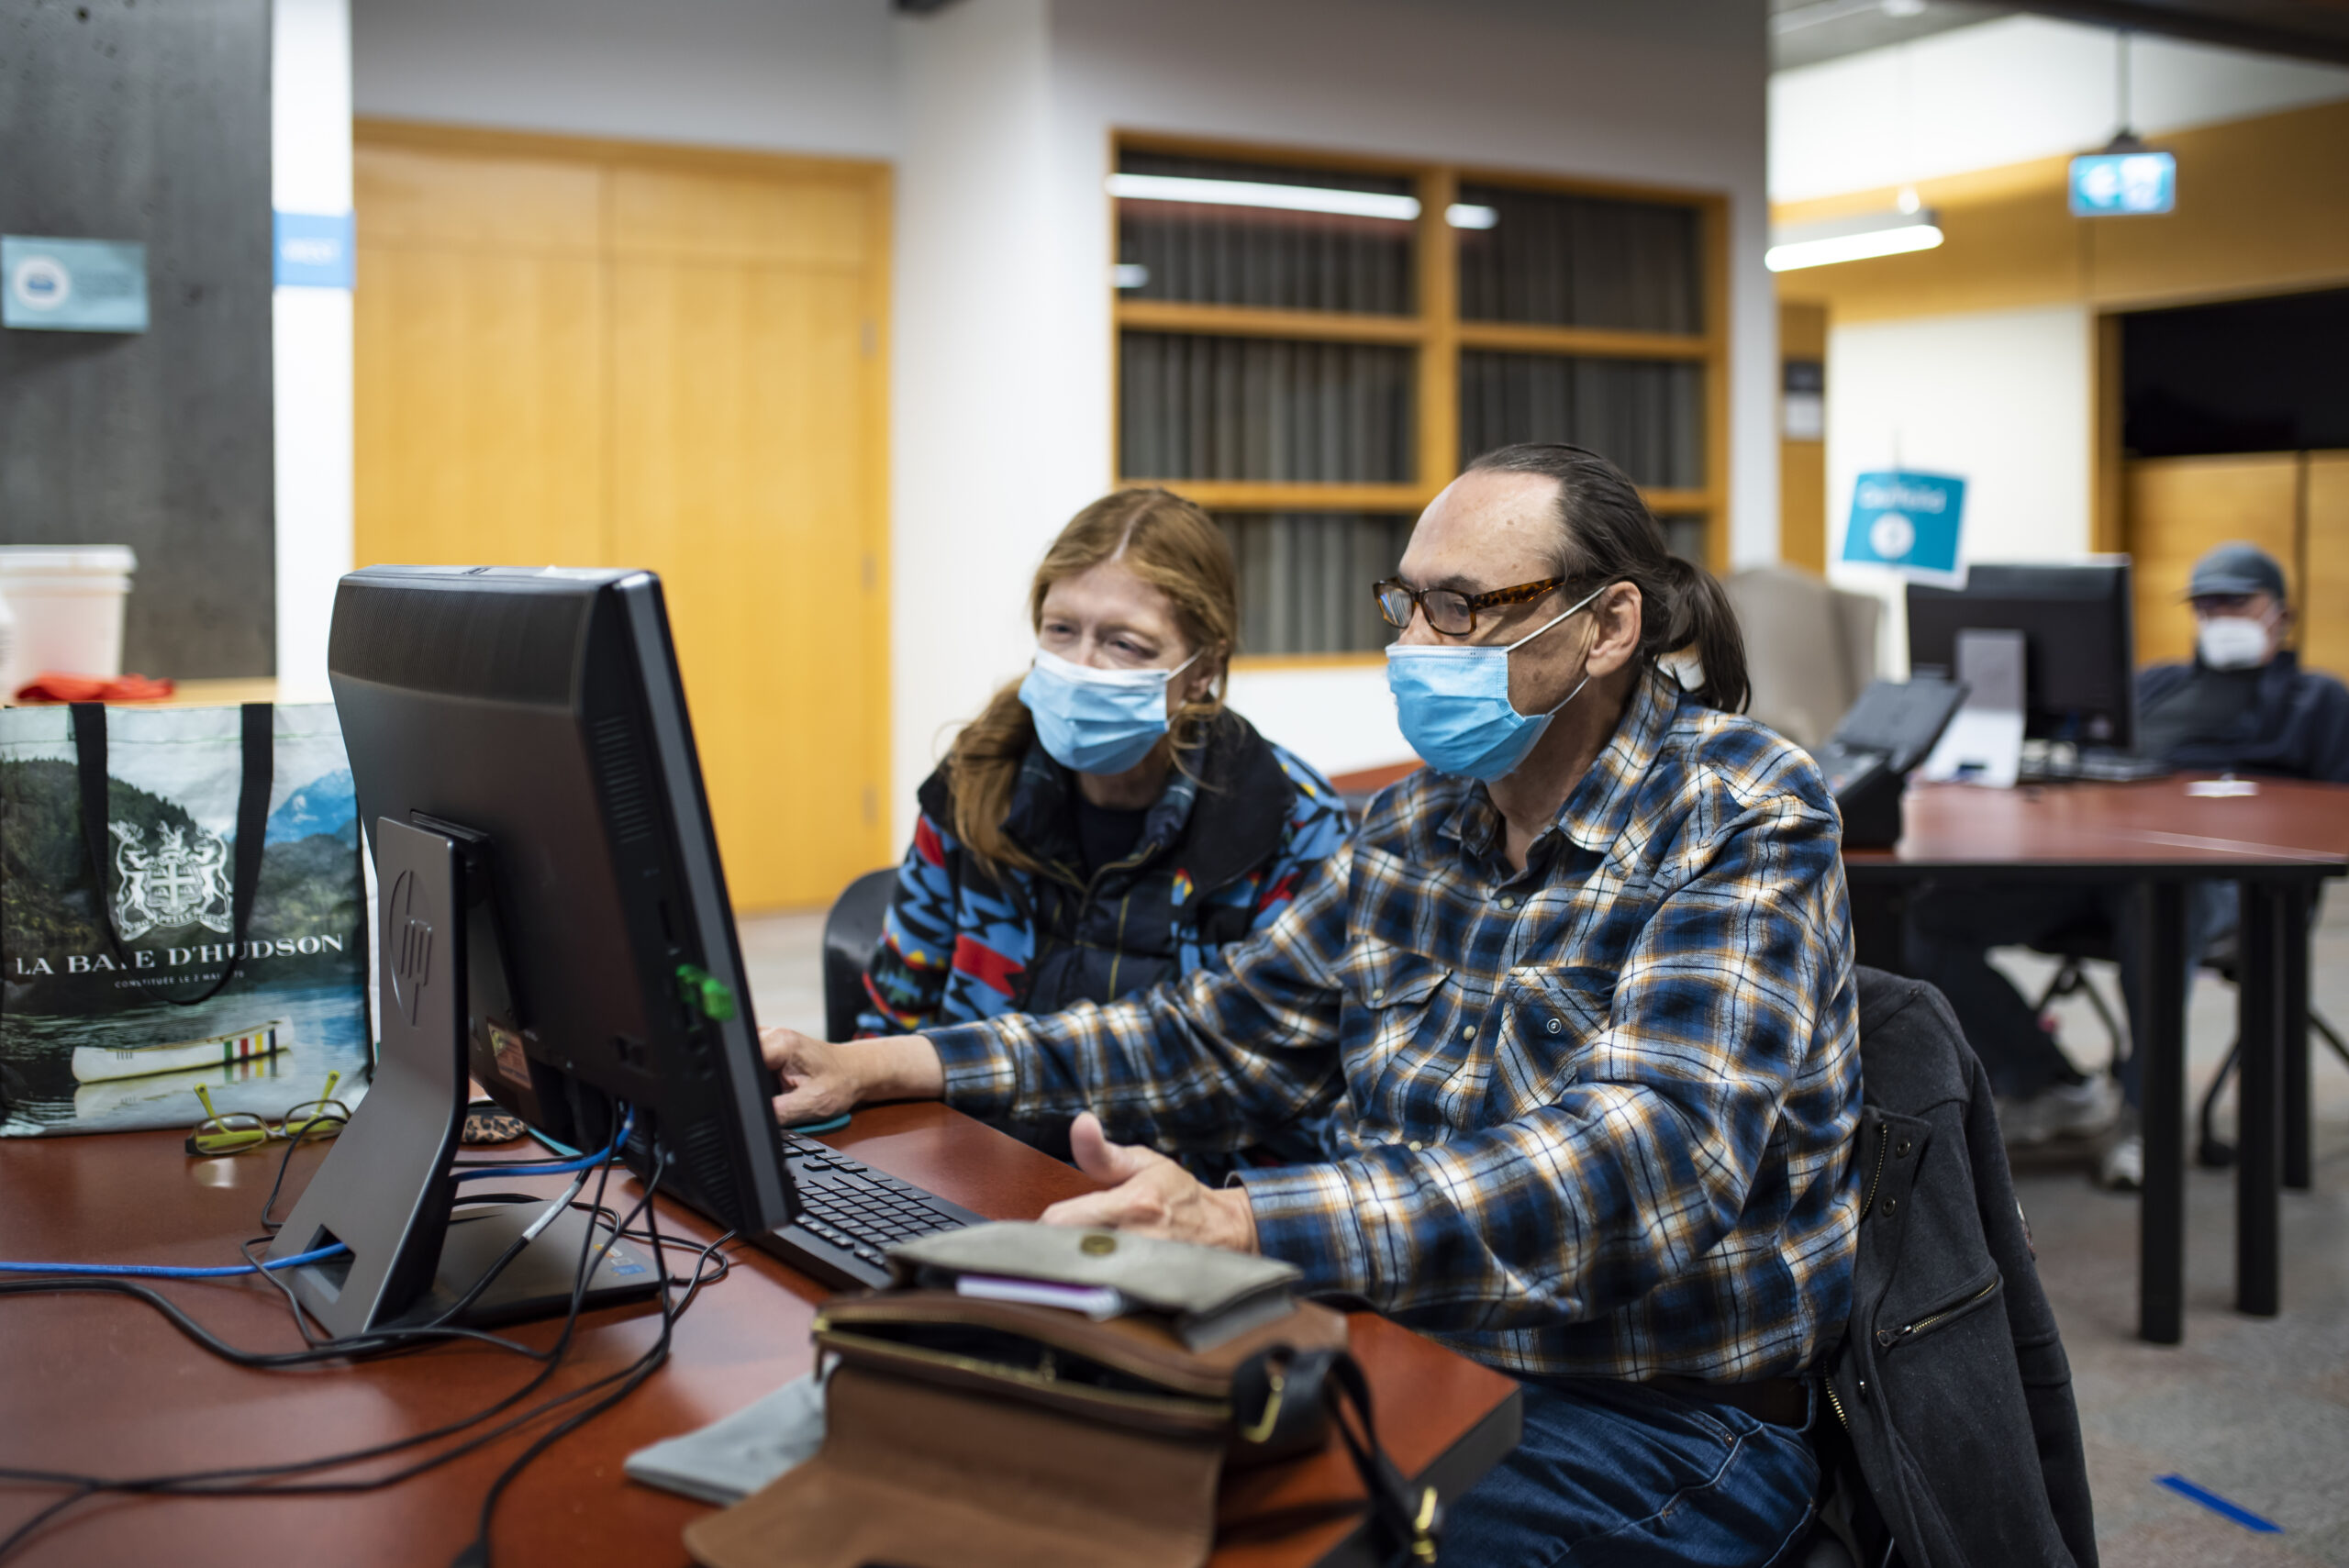 A pair of people using masks sits at a computer in the community computing centre.